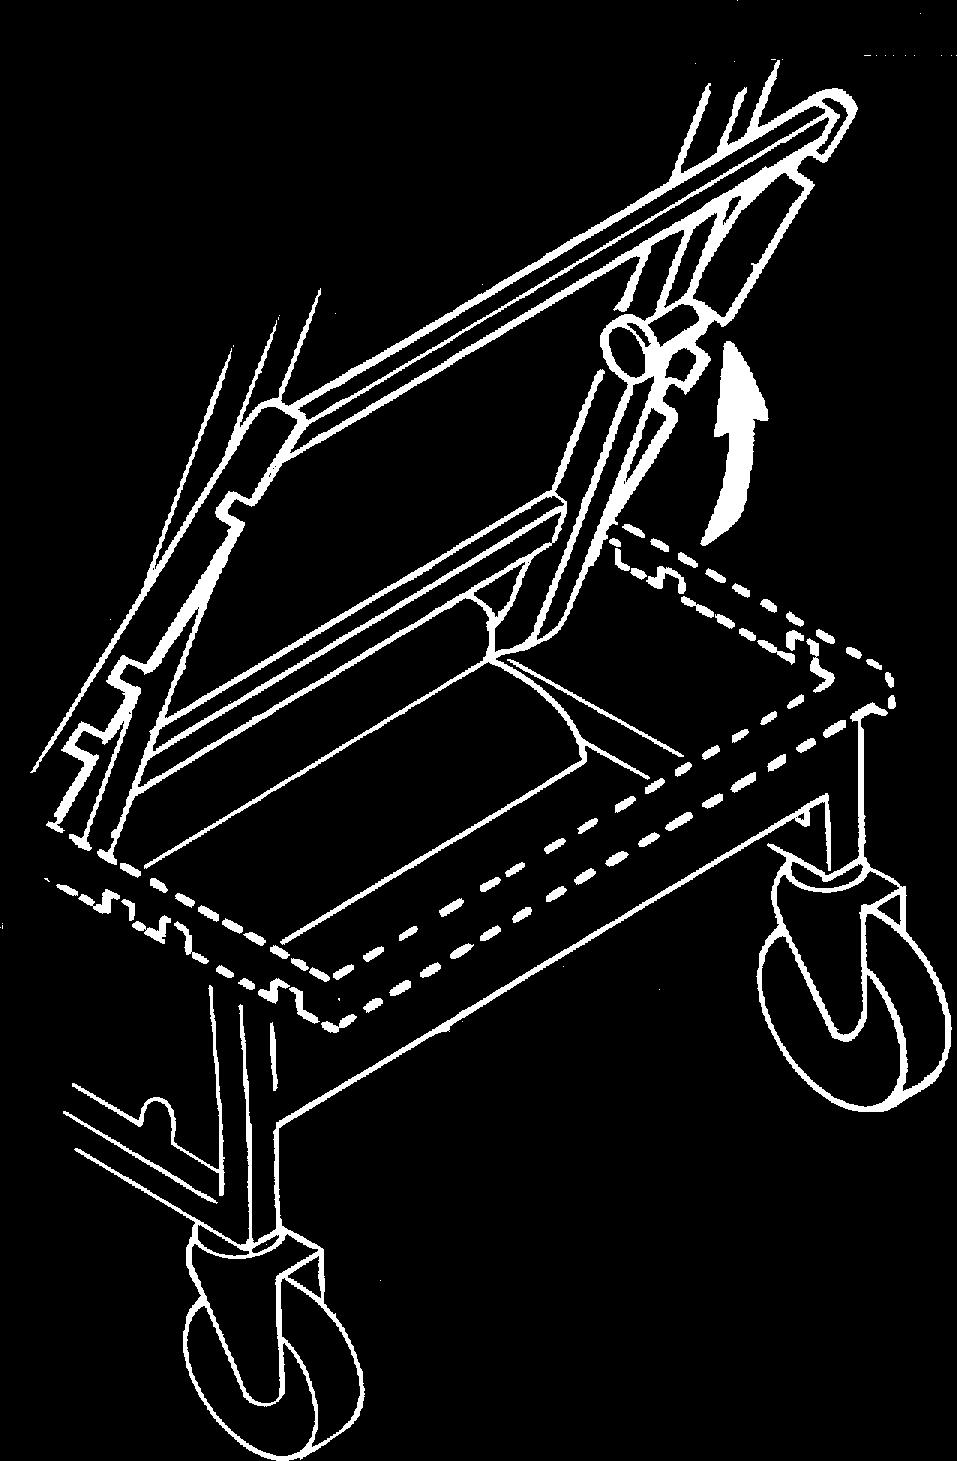 Assisted Recline NOTE: For this procedure, refer to FIGURE 2. 1. Swing recline lock bar up to chair back and lock into position. 2. Grasp the armrest with one hand and the push bar with the other hand.